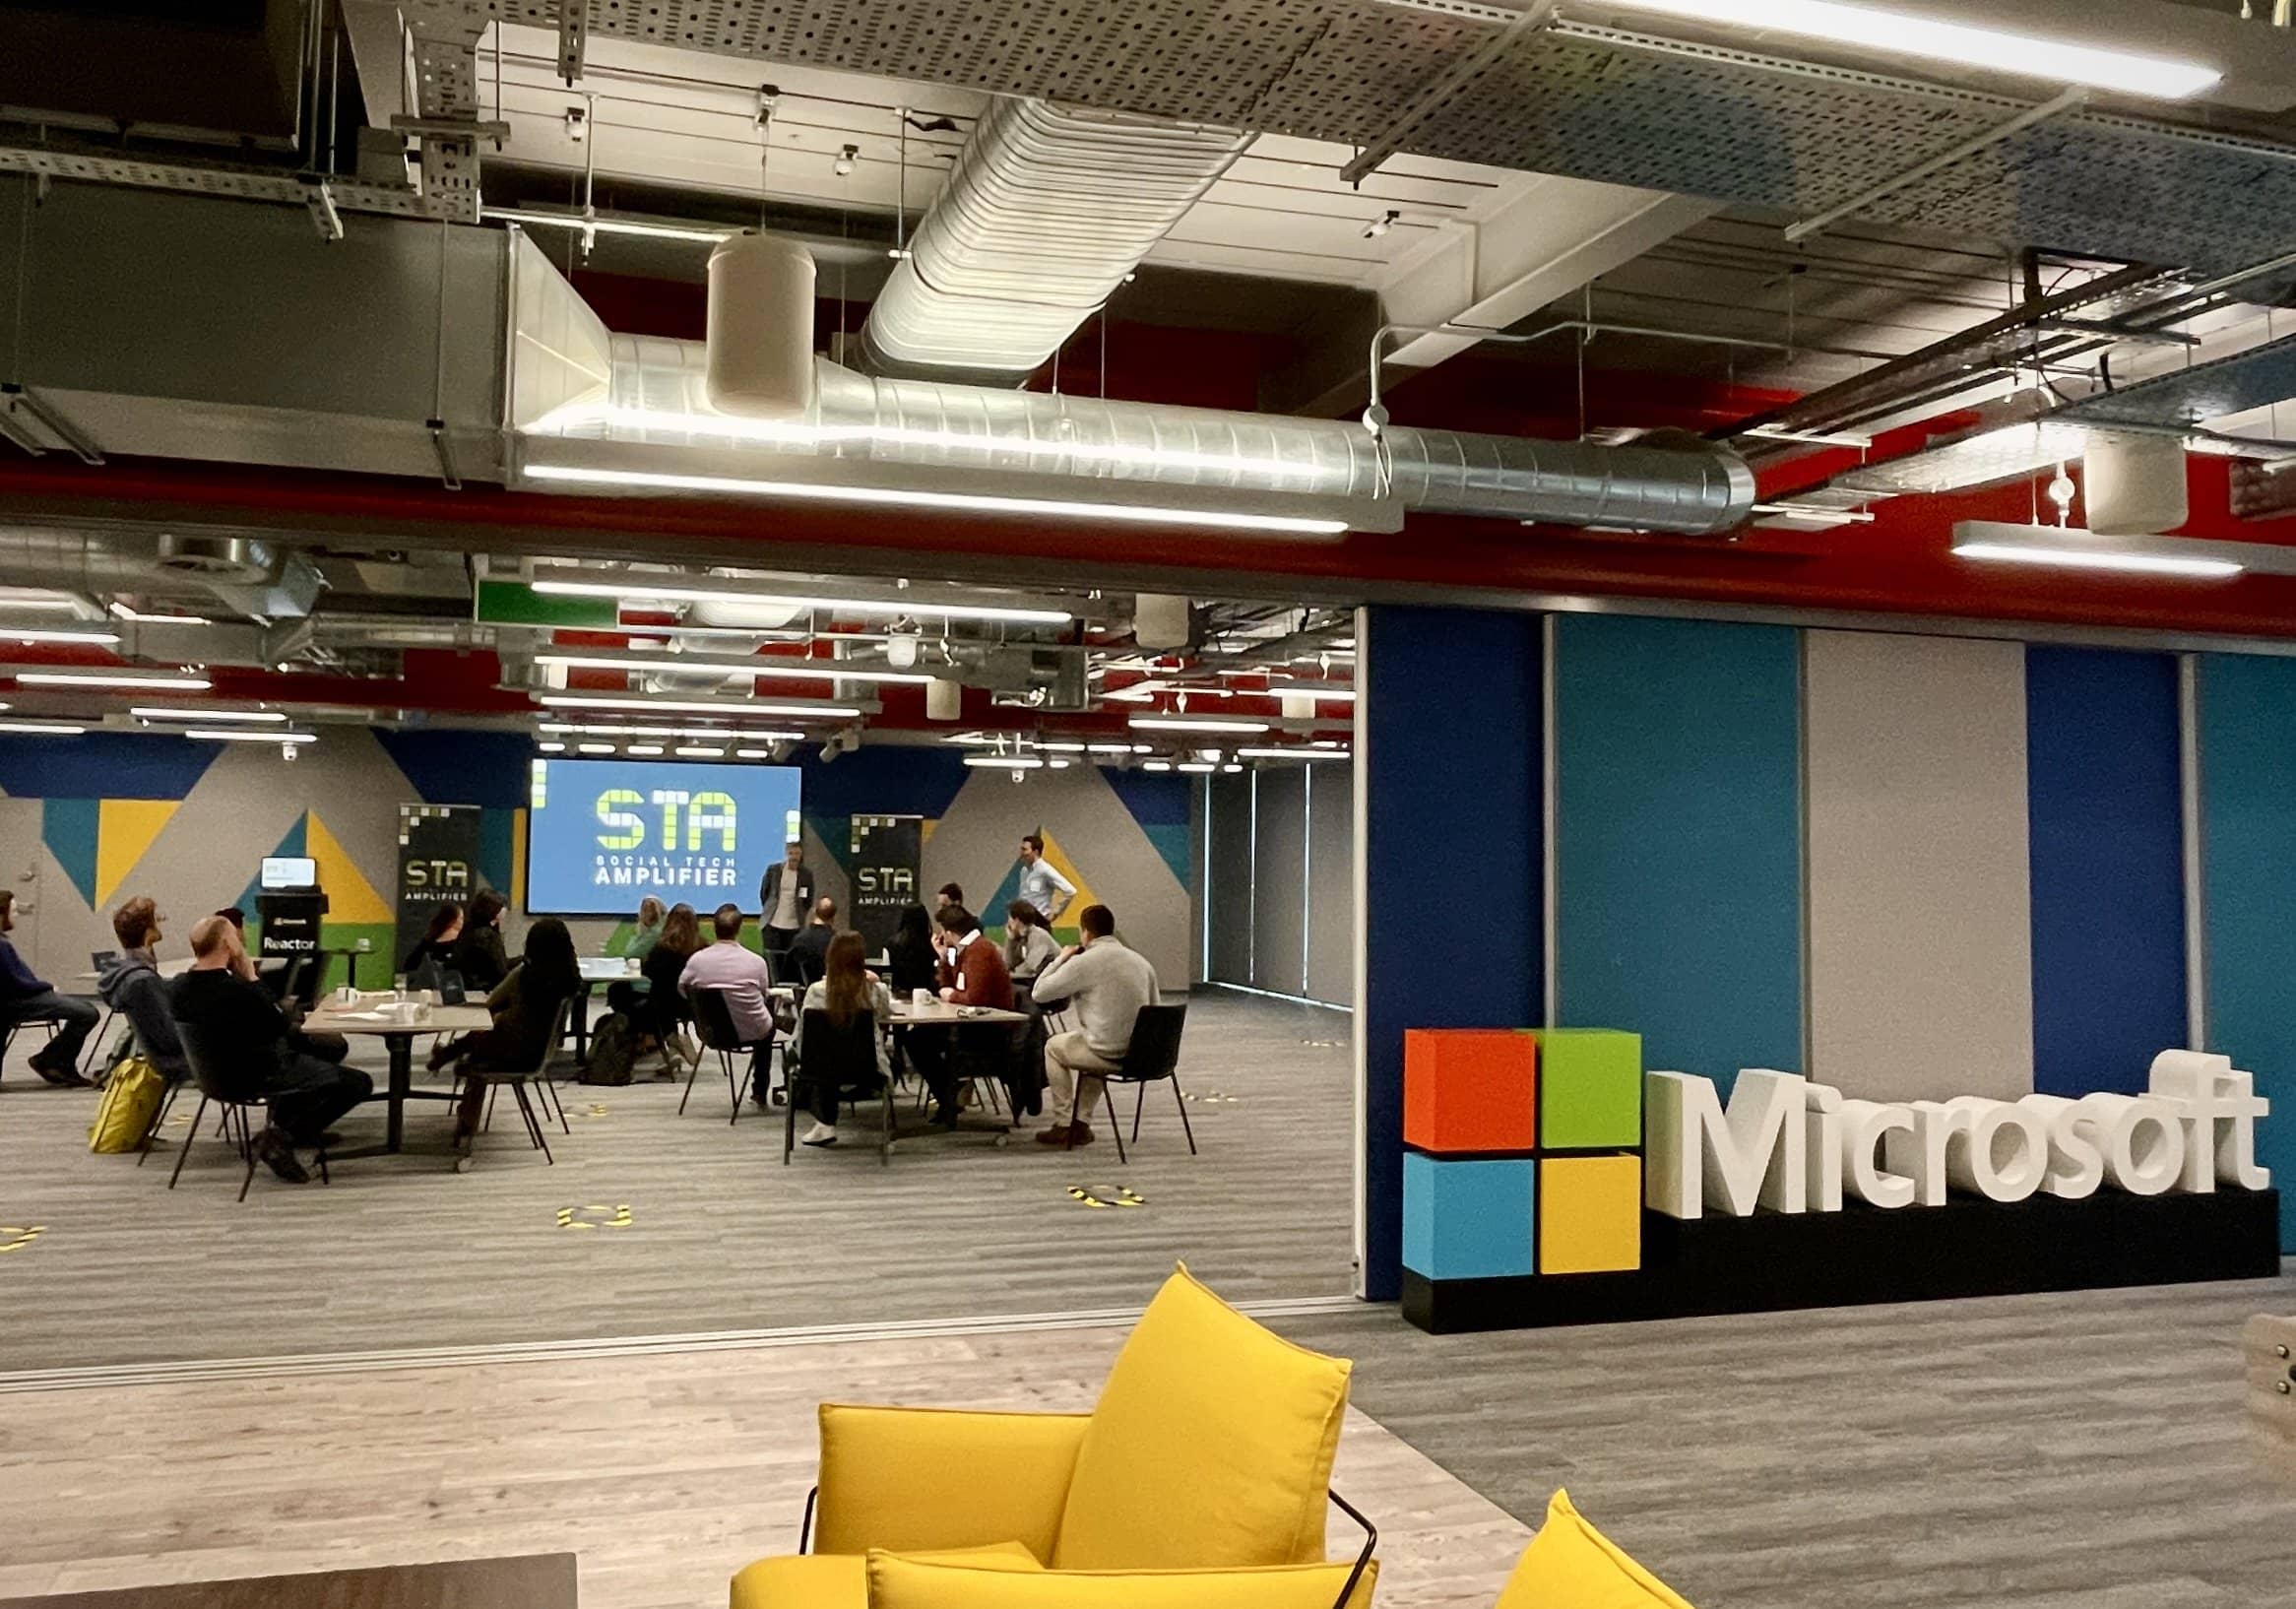 Taken through a doorway, professionals sit around tables listening to a speaker who stands in front of a presentation screen which shows the Social Tech Amplifier logo on it. In the foreground, the Microsoft logo can be seen.